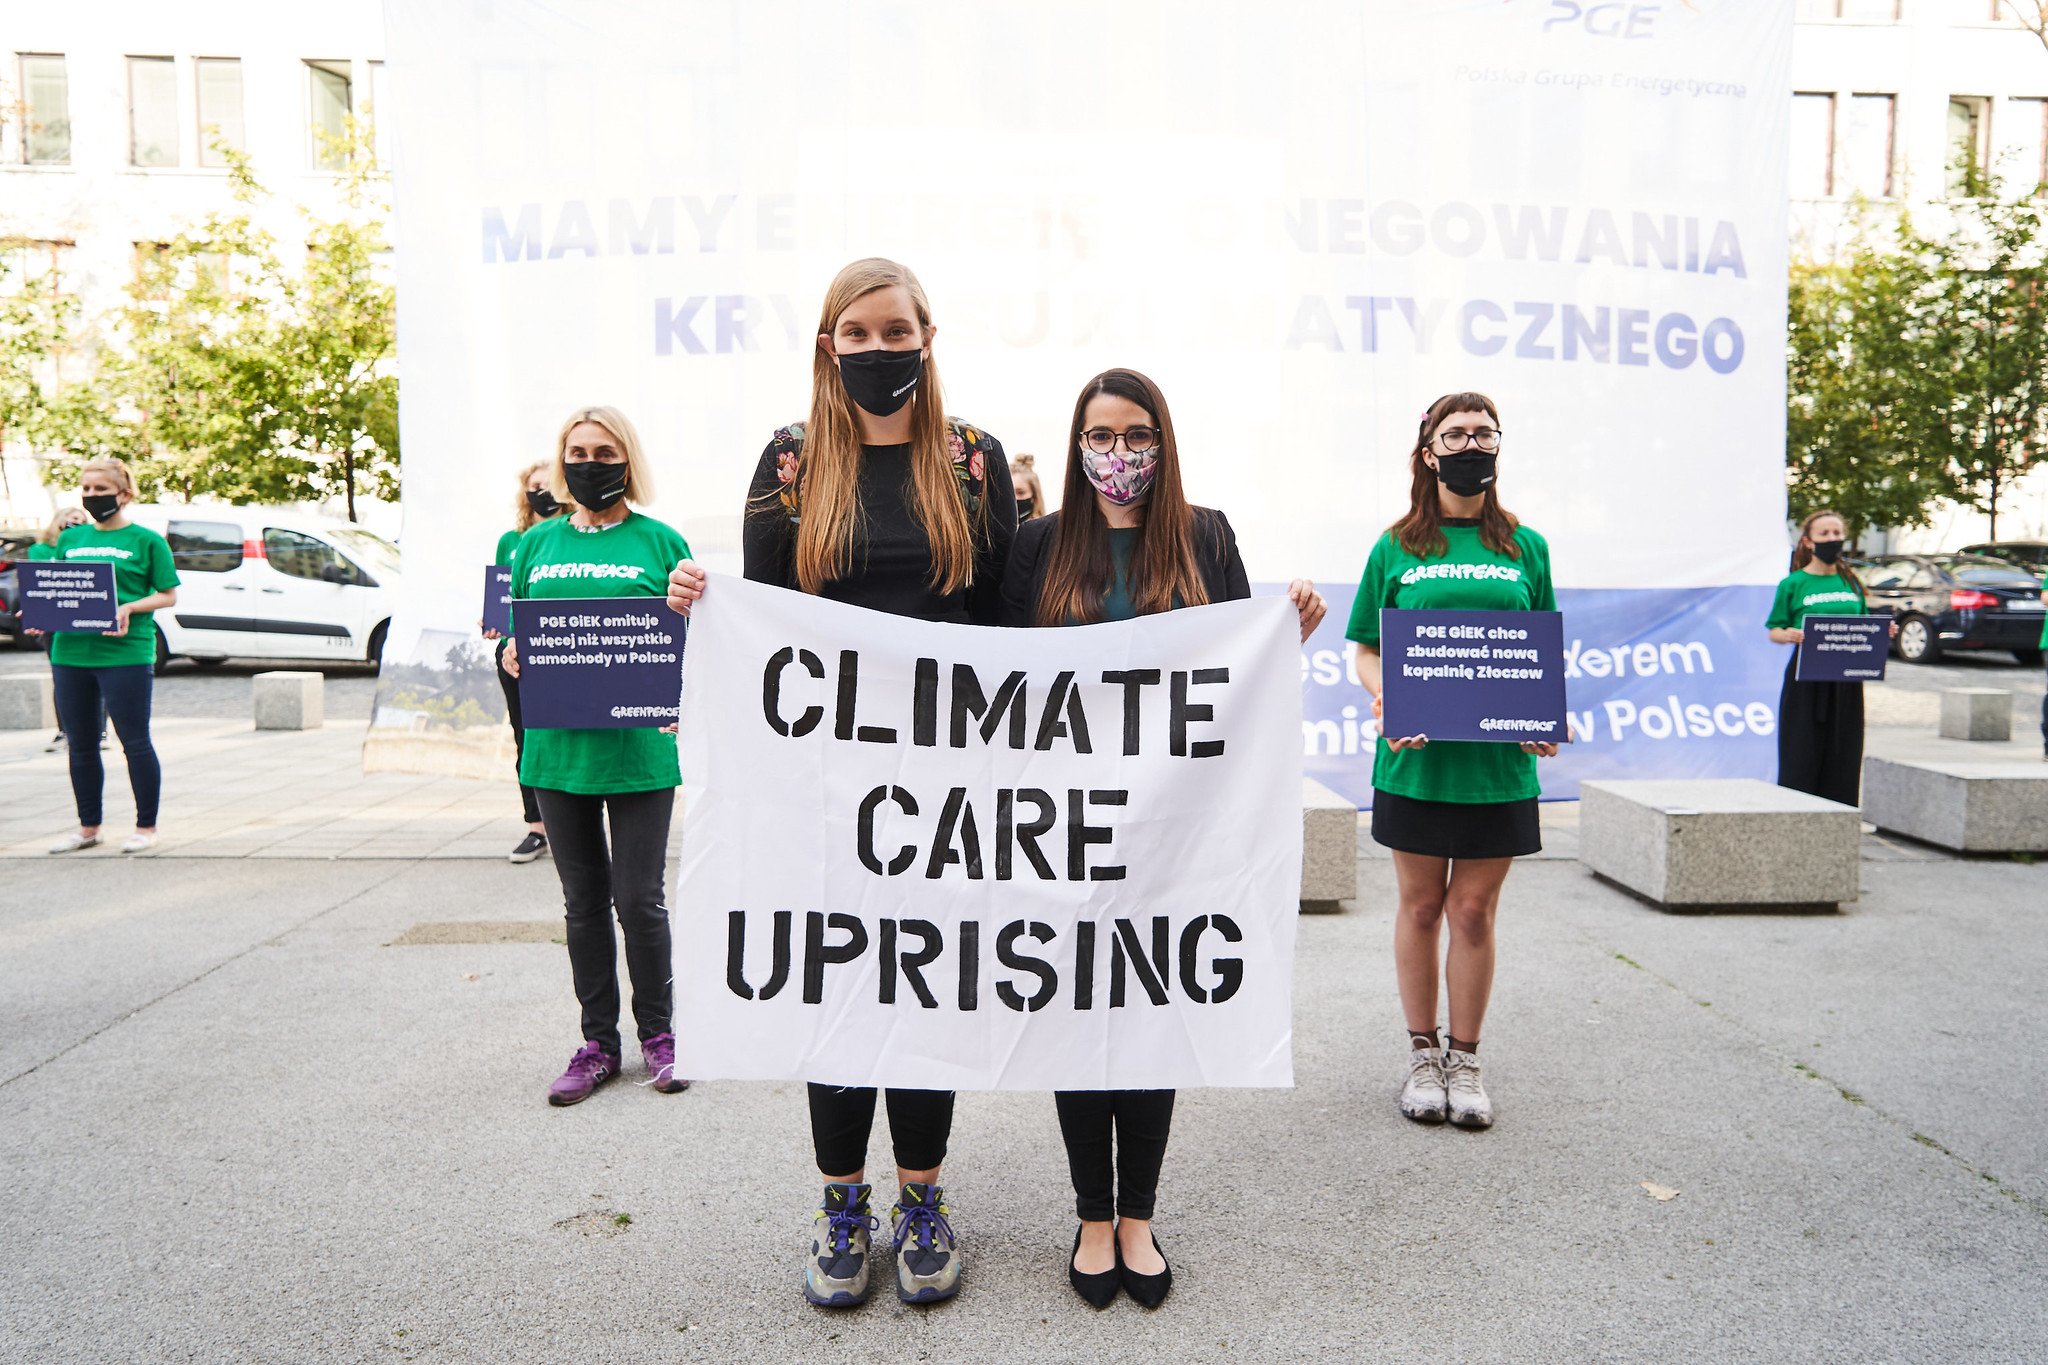 Polish activists stand up for the climate, in the climate care uprising. © Max Zieliński / Greenpeace